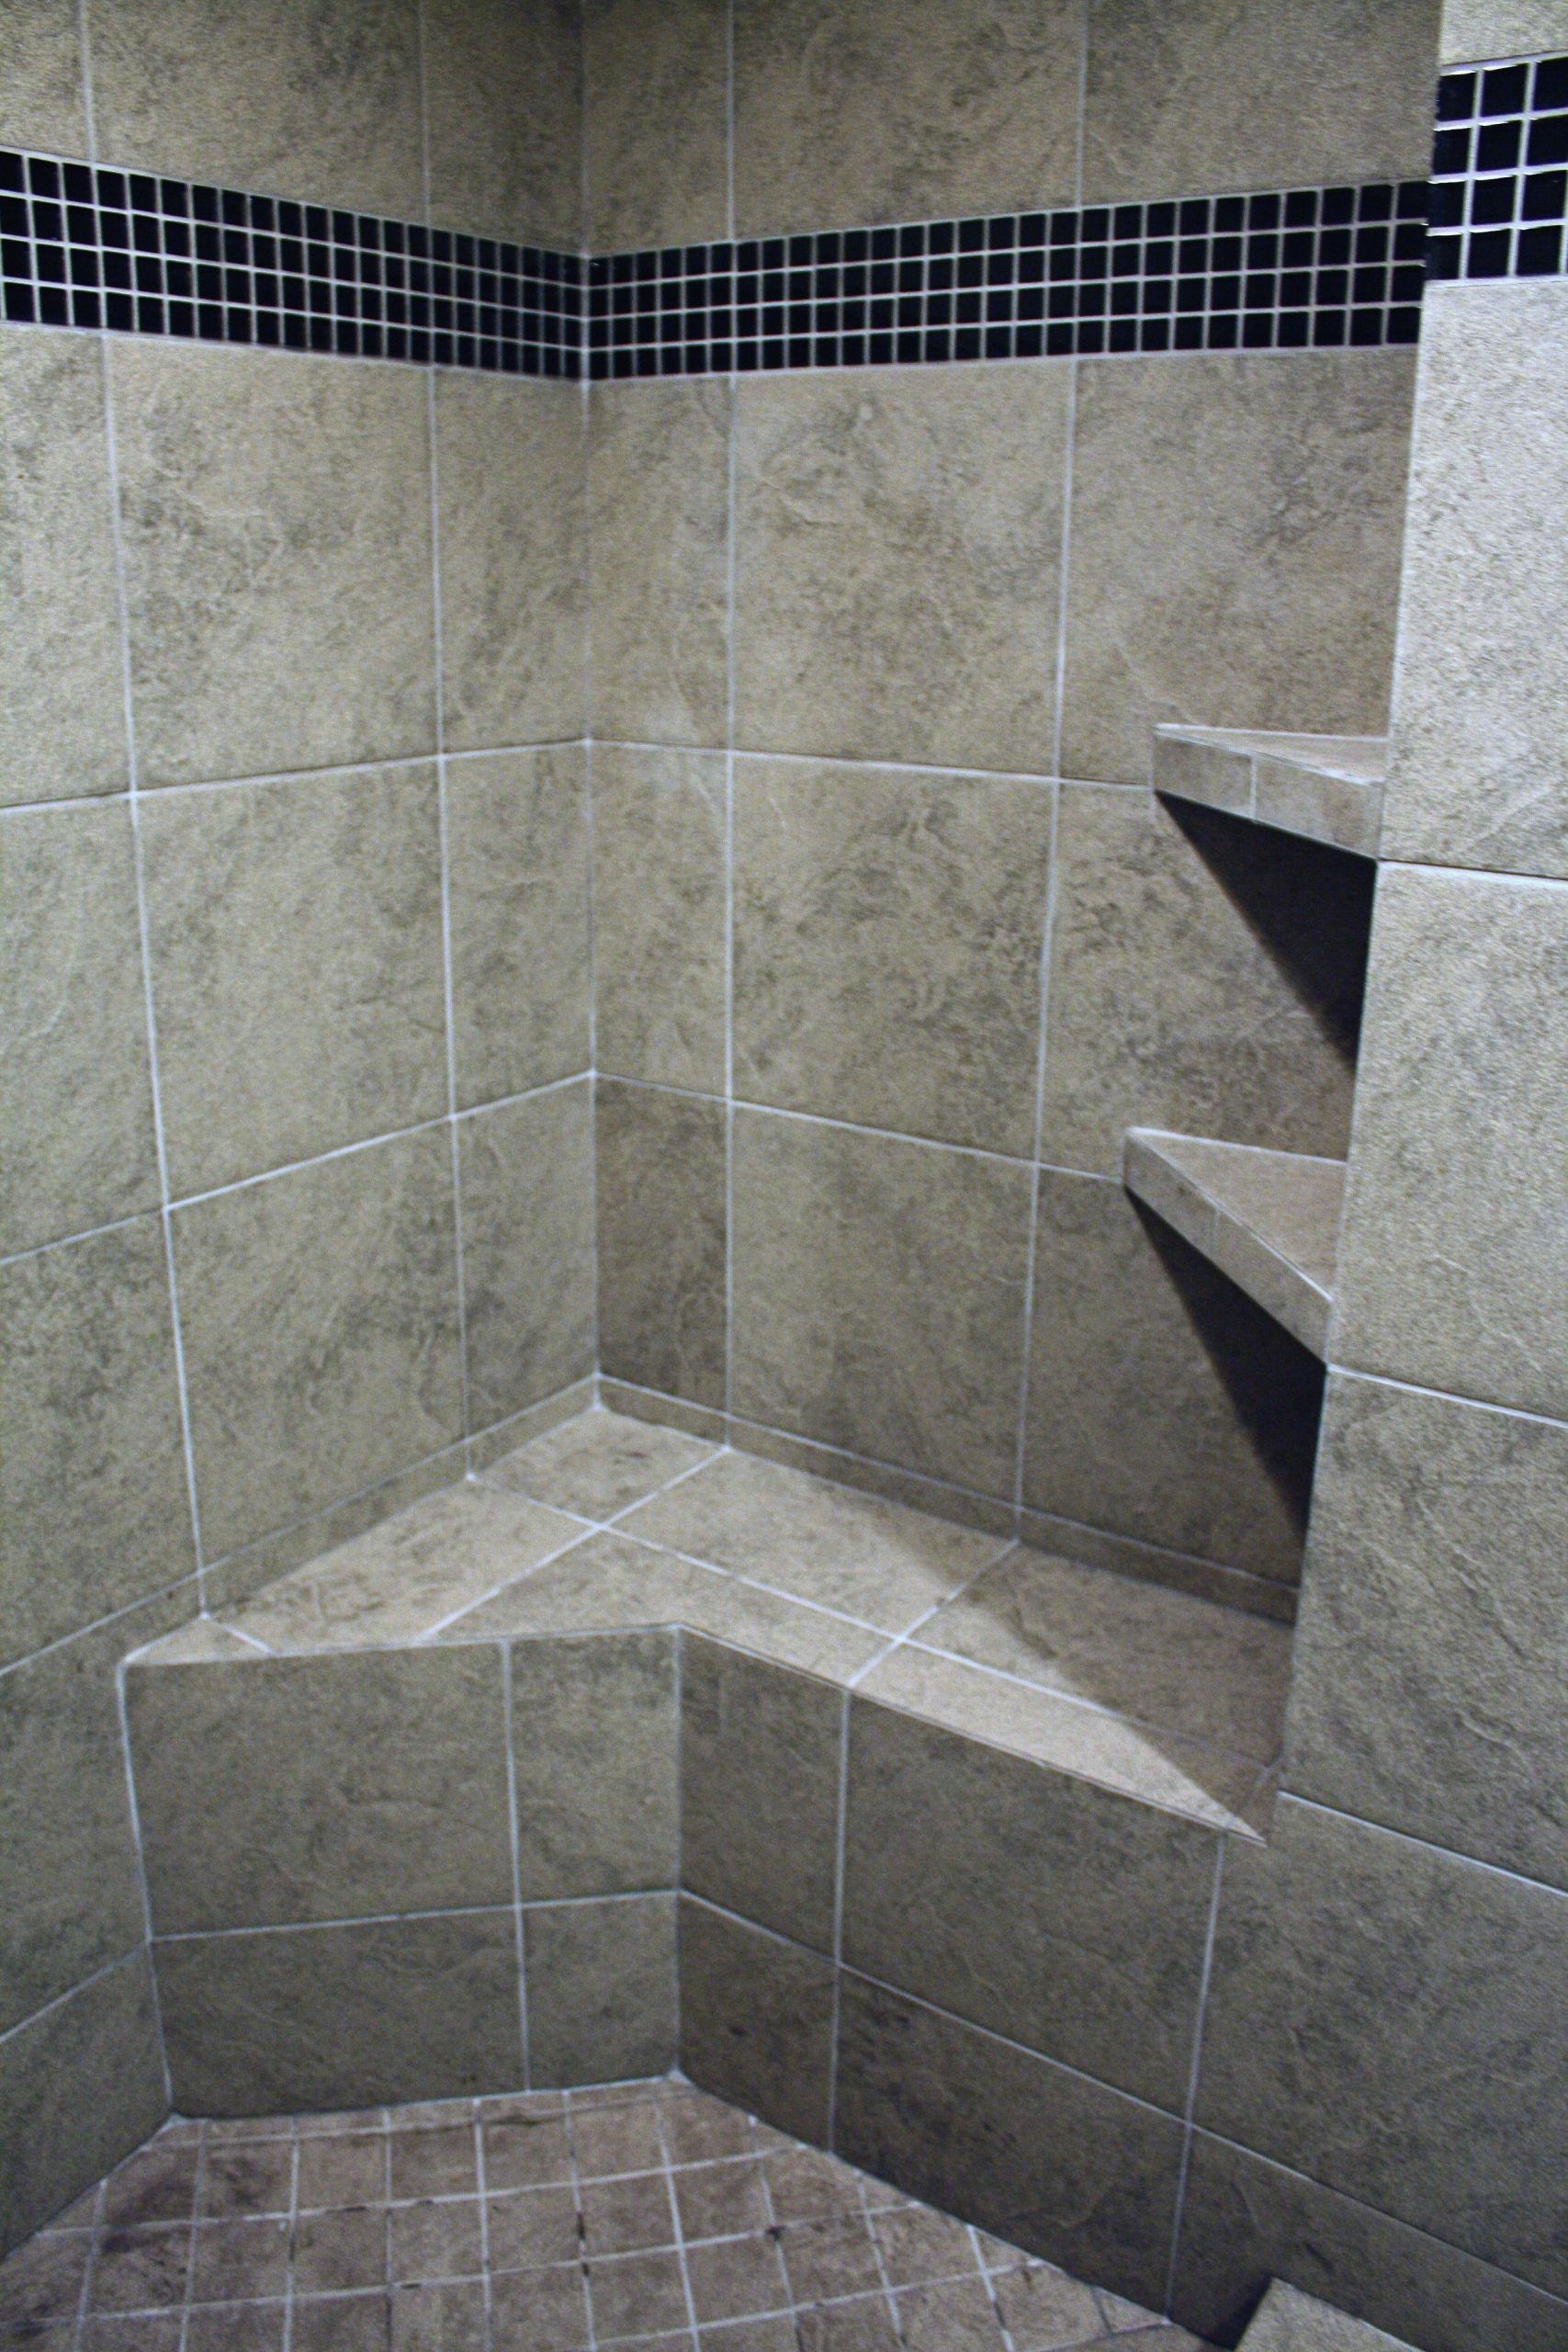 Ceramic Tile For Bathroom Showers
 Love the bench and shelving in this customer ceramic tile